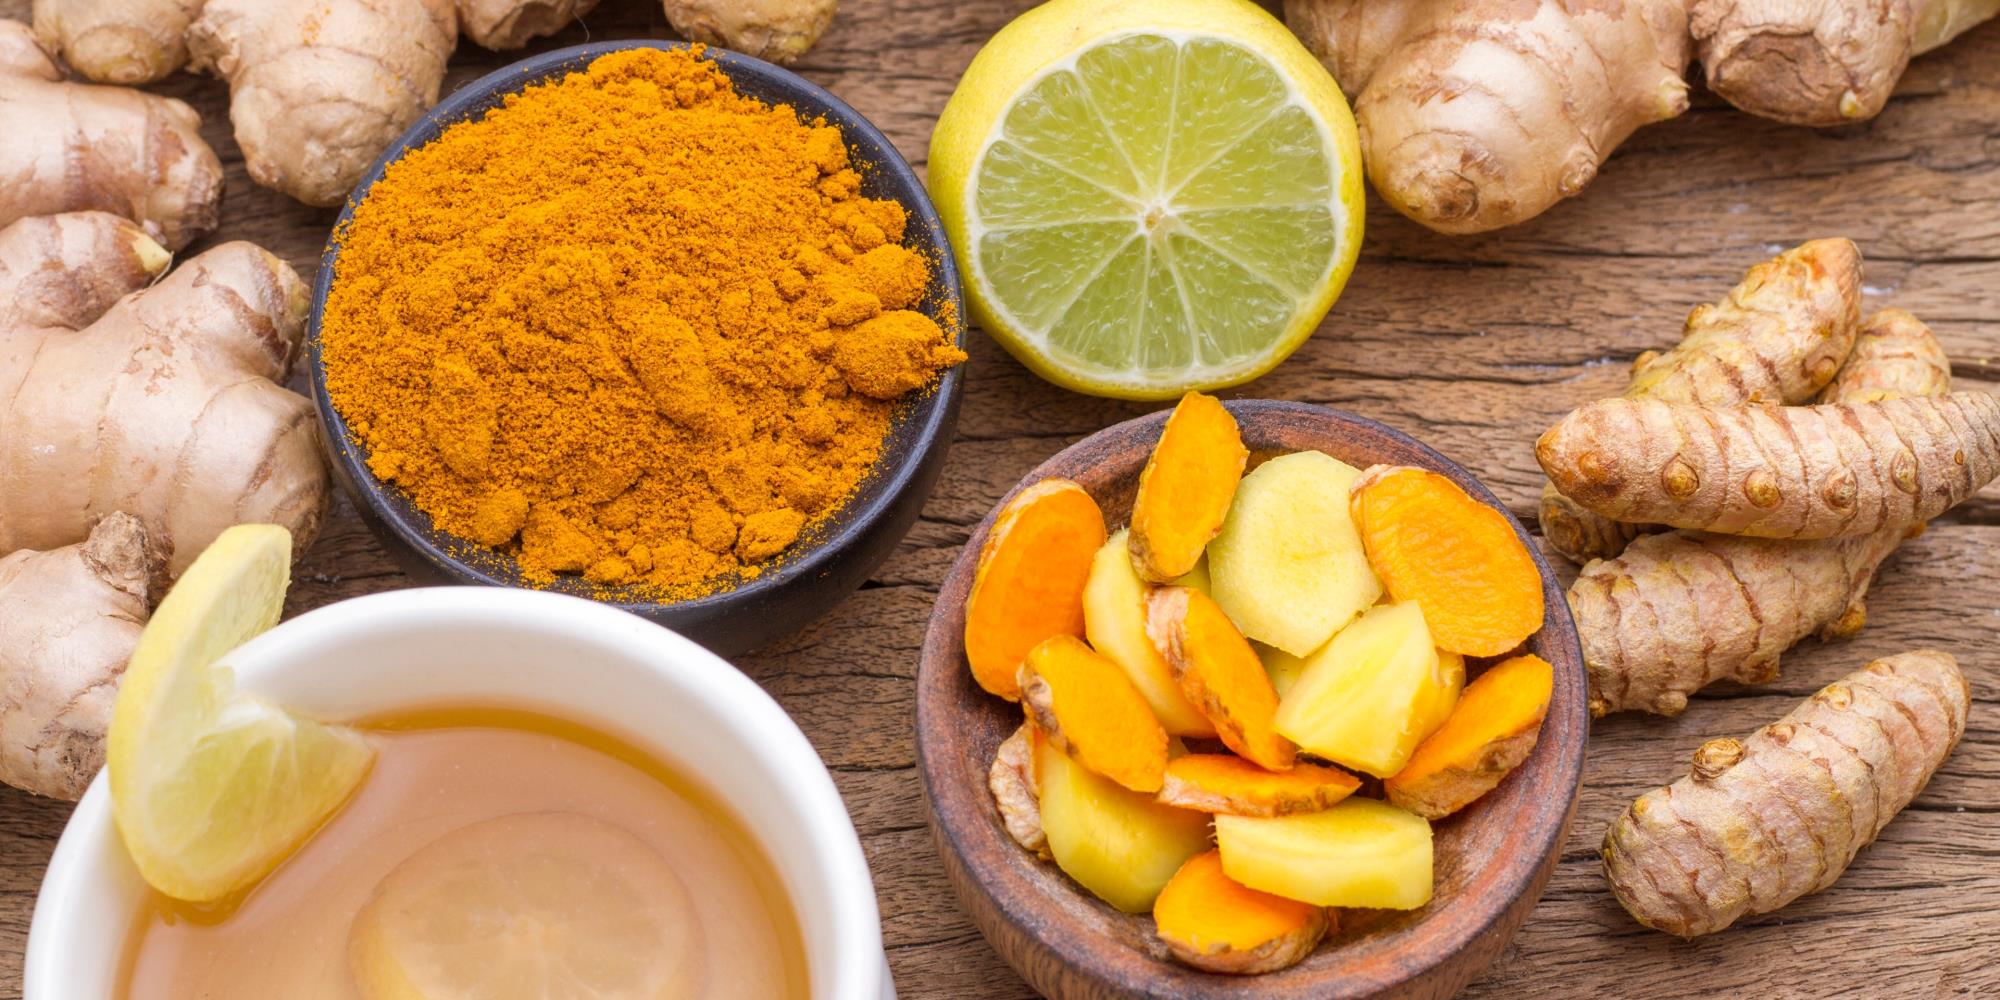 Comparing the medicinal properties of ginger and turmeric